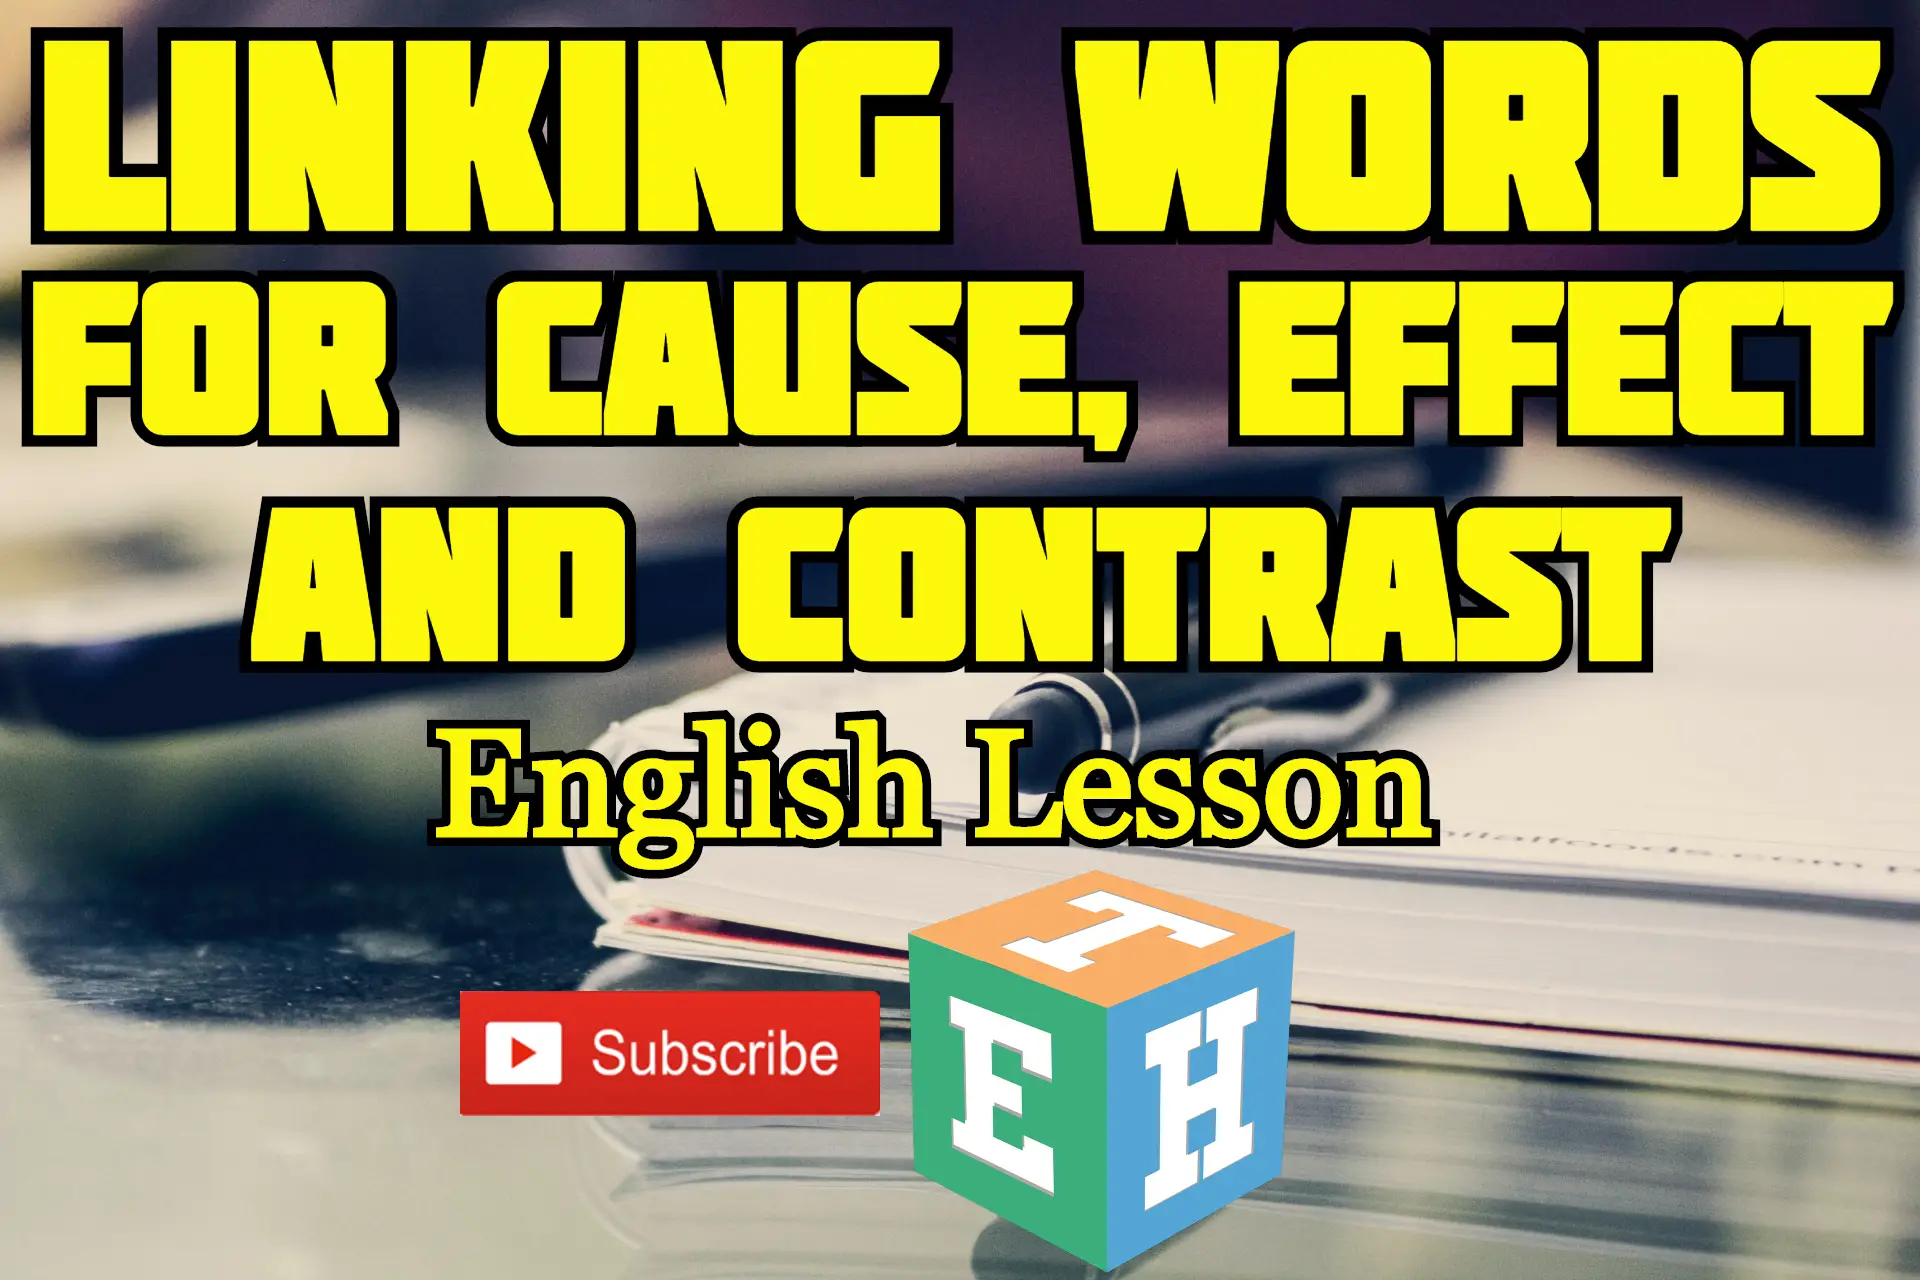 Linking Words for Cause, Effect and Contrast